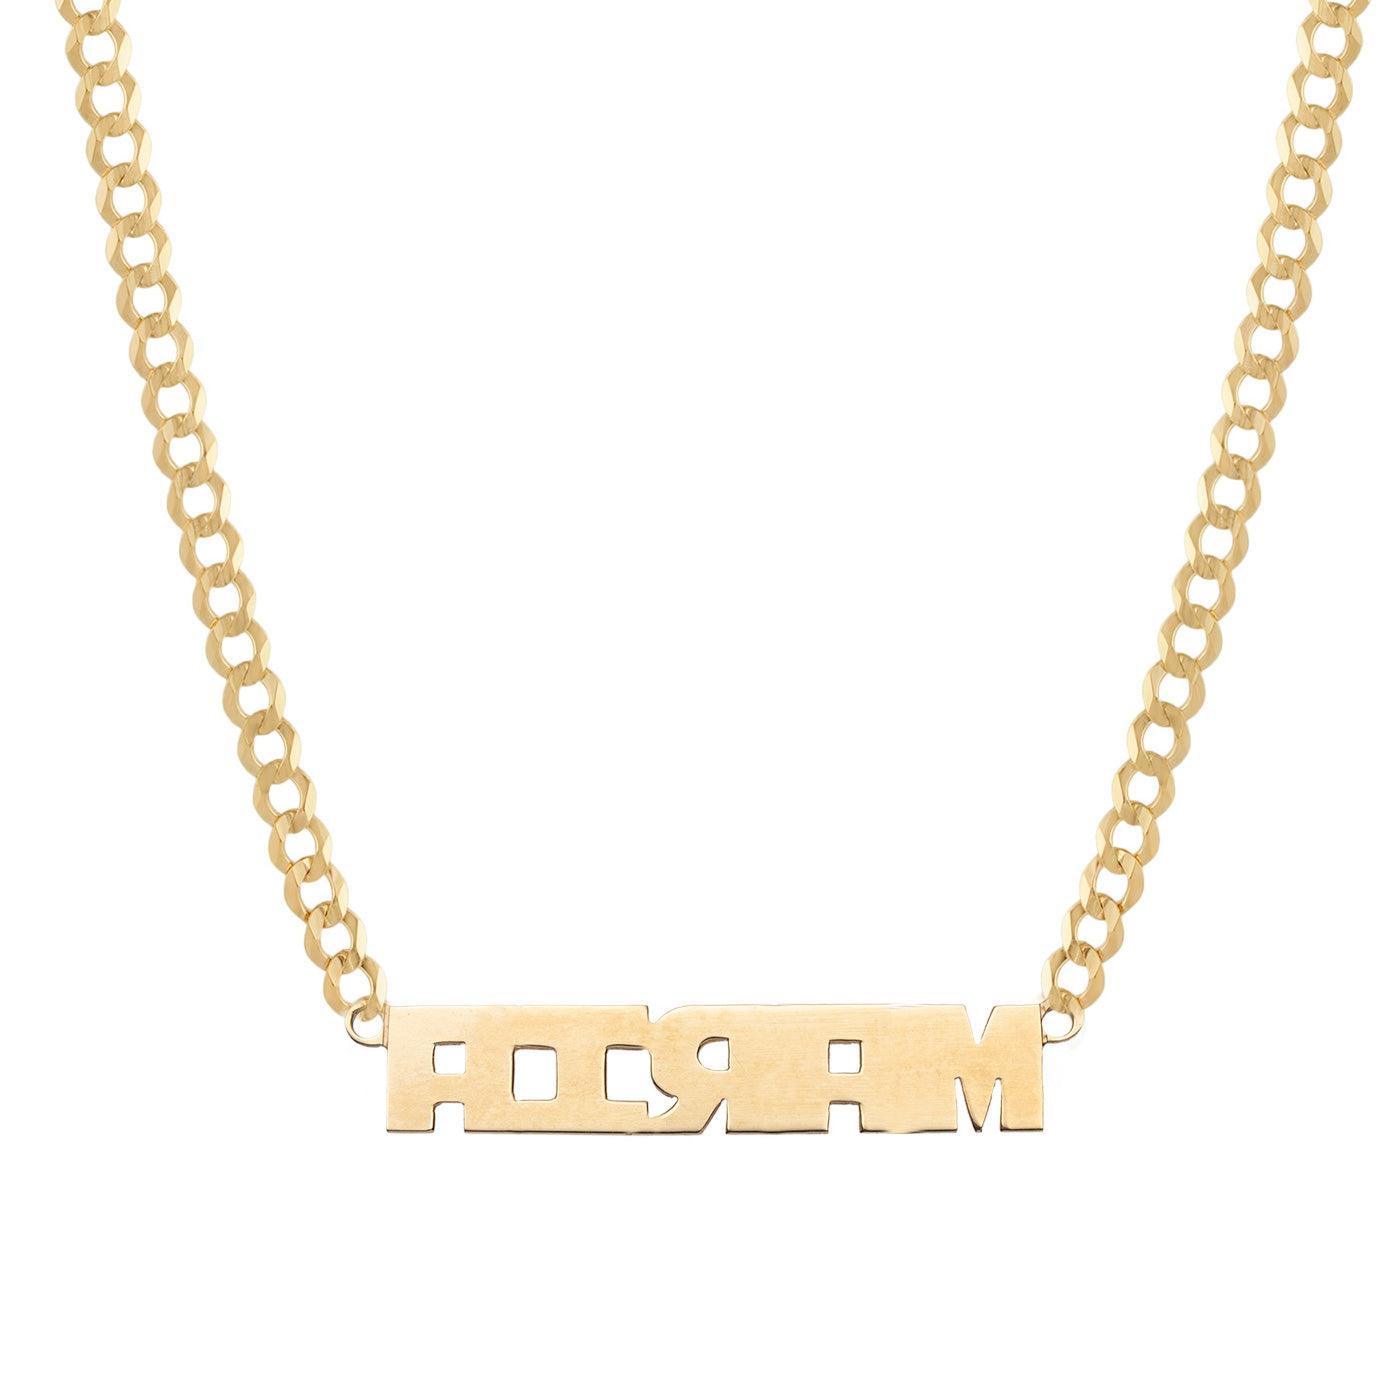 Ladies Script Name Plate Necklace 14K Gold - Style 88 - bayamjewelry